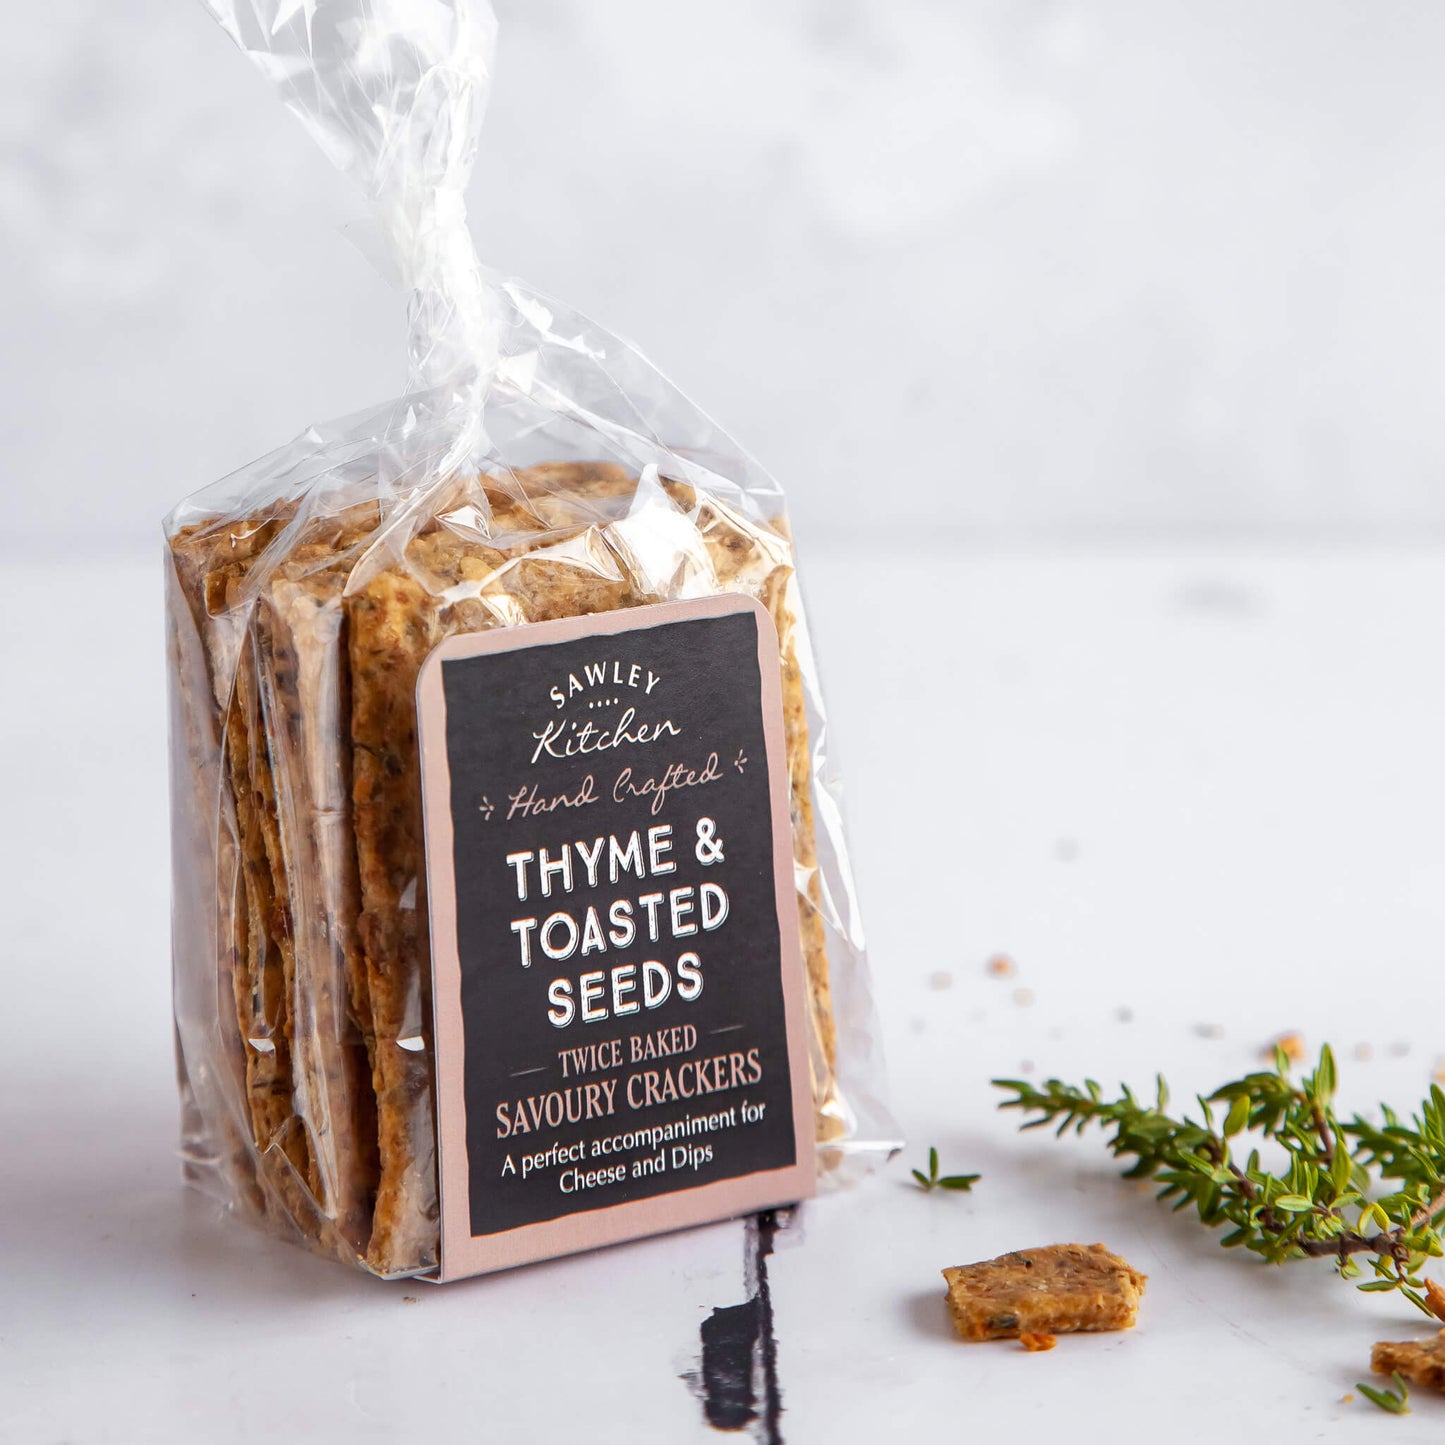 Thyme & Toasted Seeds Savoury Crackers